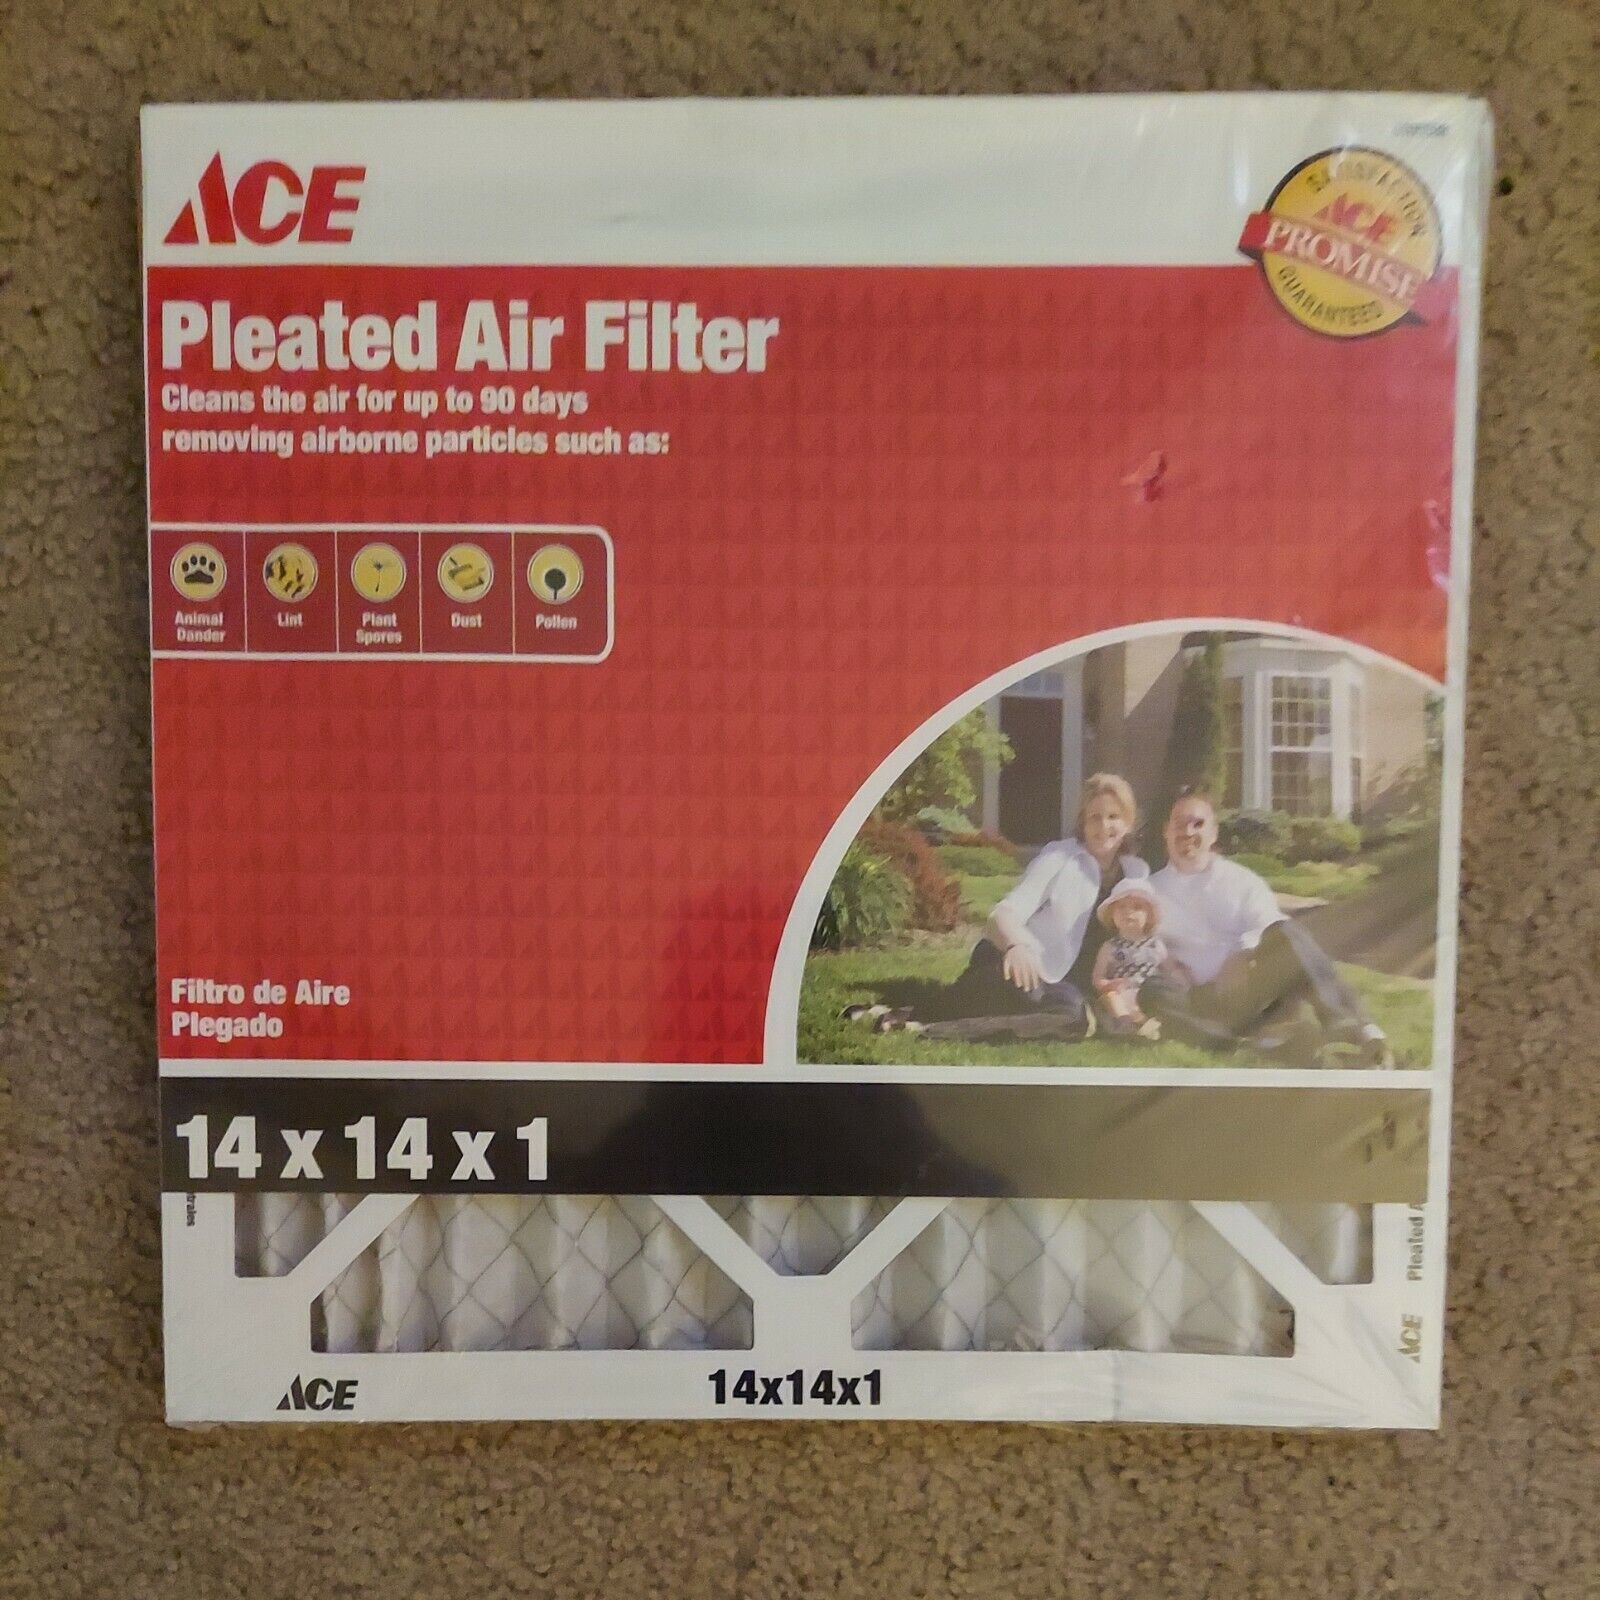 Ace Pleated Air Filter 14×14×1 - $4.50